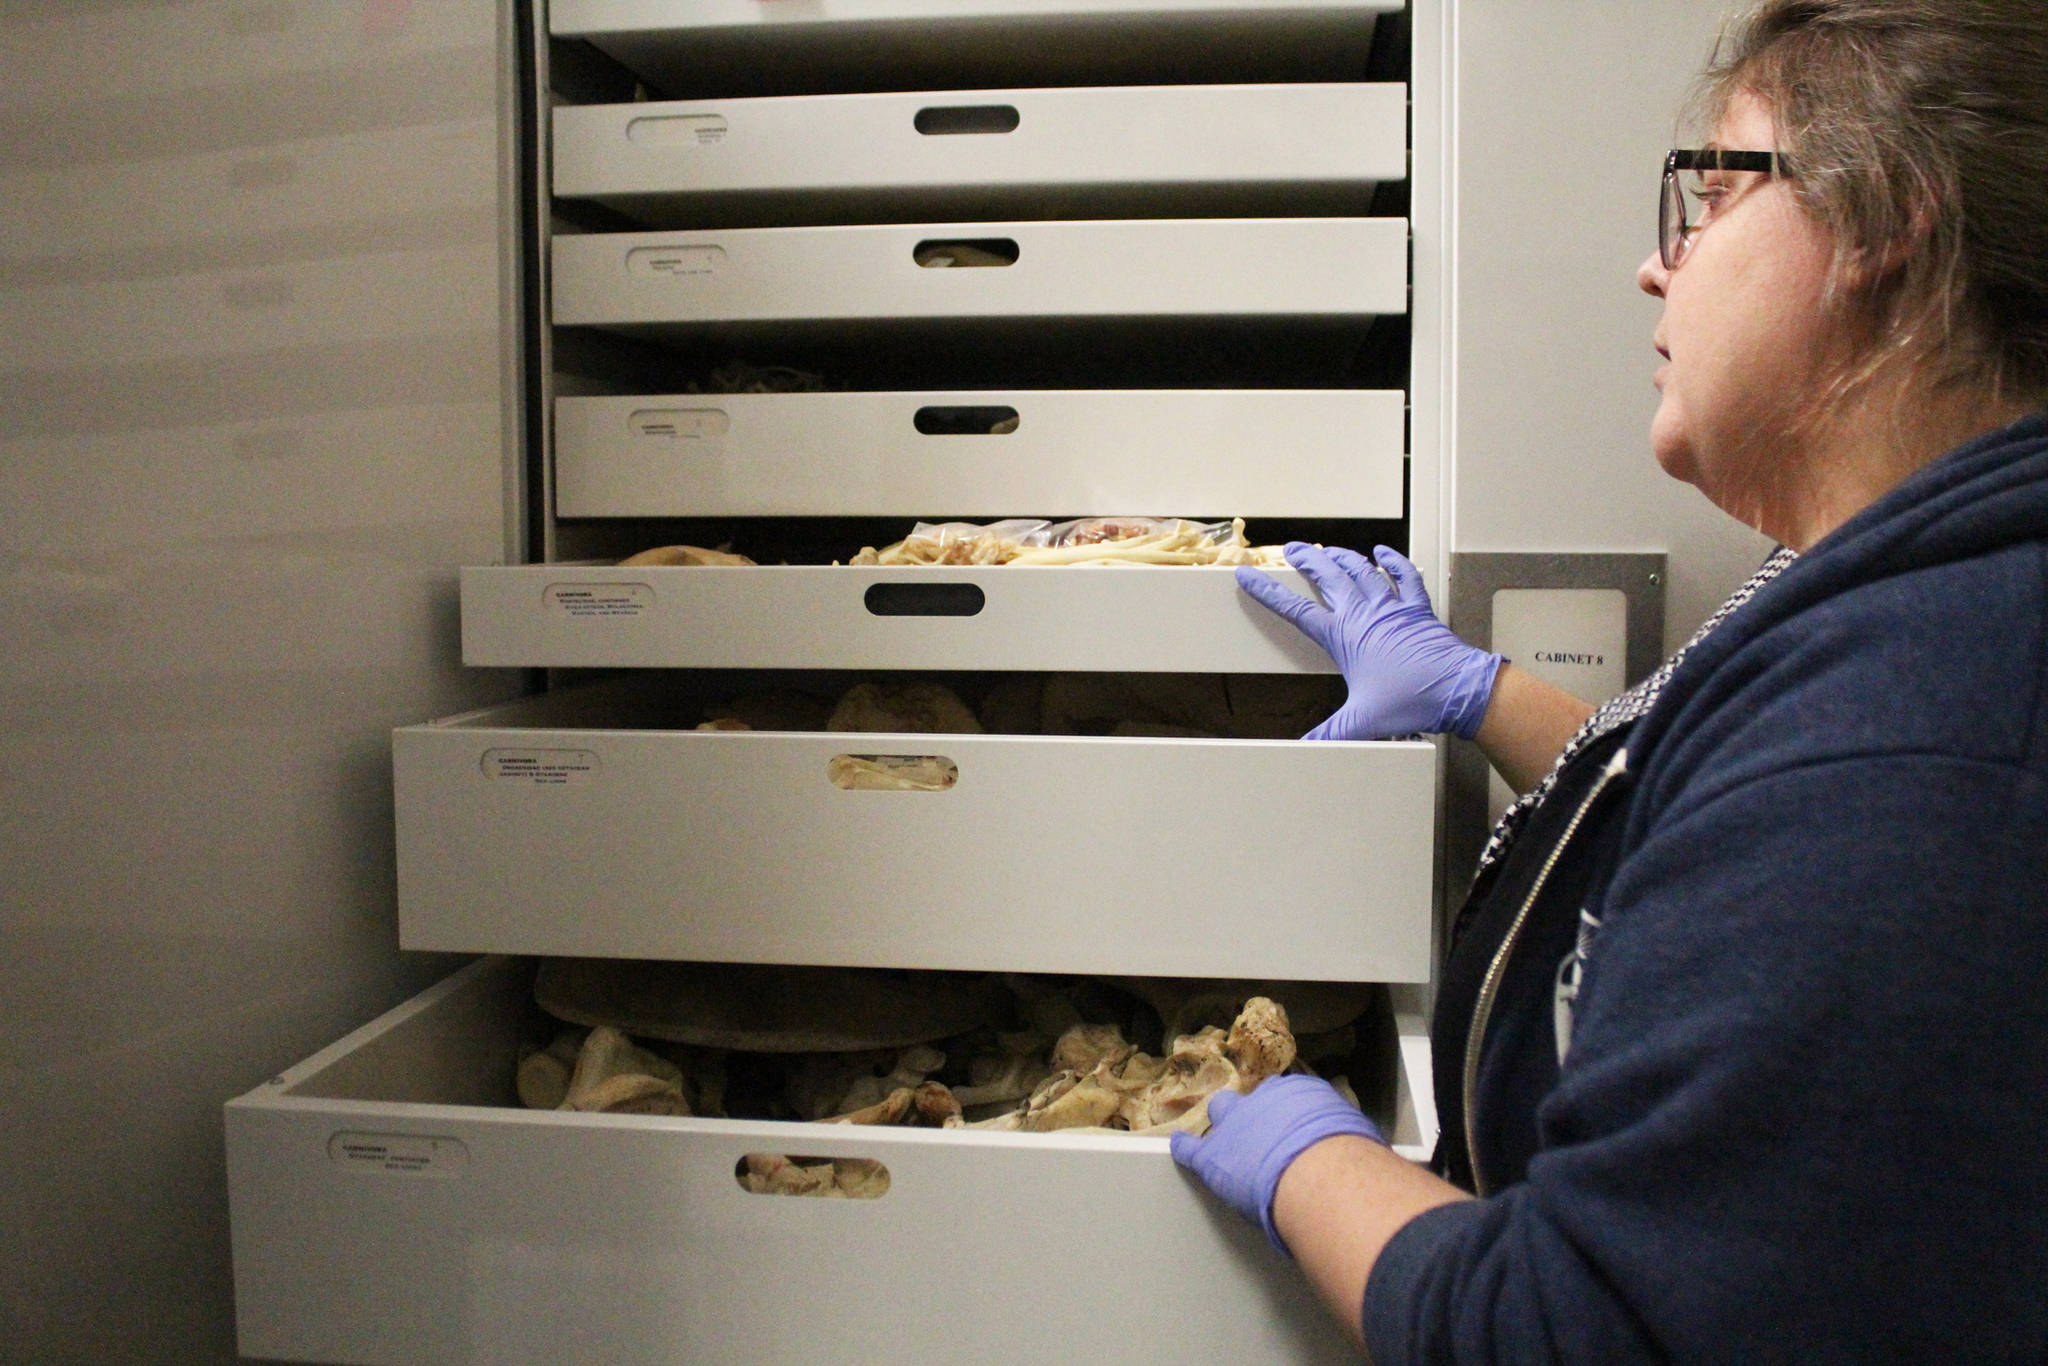 Savanna Bradley, collections manager for the Pratt Museum, opens drawers of animal bones during a tour of the building’s collections storage Thursday, Feb. 15, 2018 in Homer, Alaska. (Photo by Megan Pacer/Homer News)